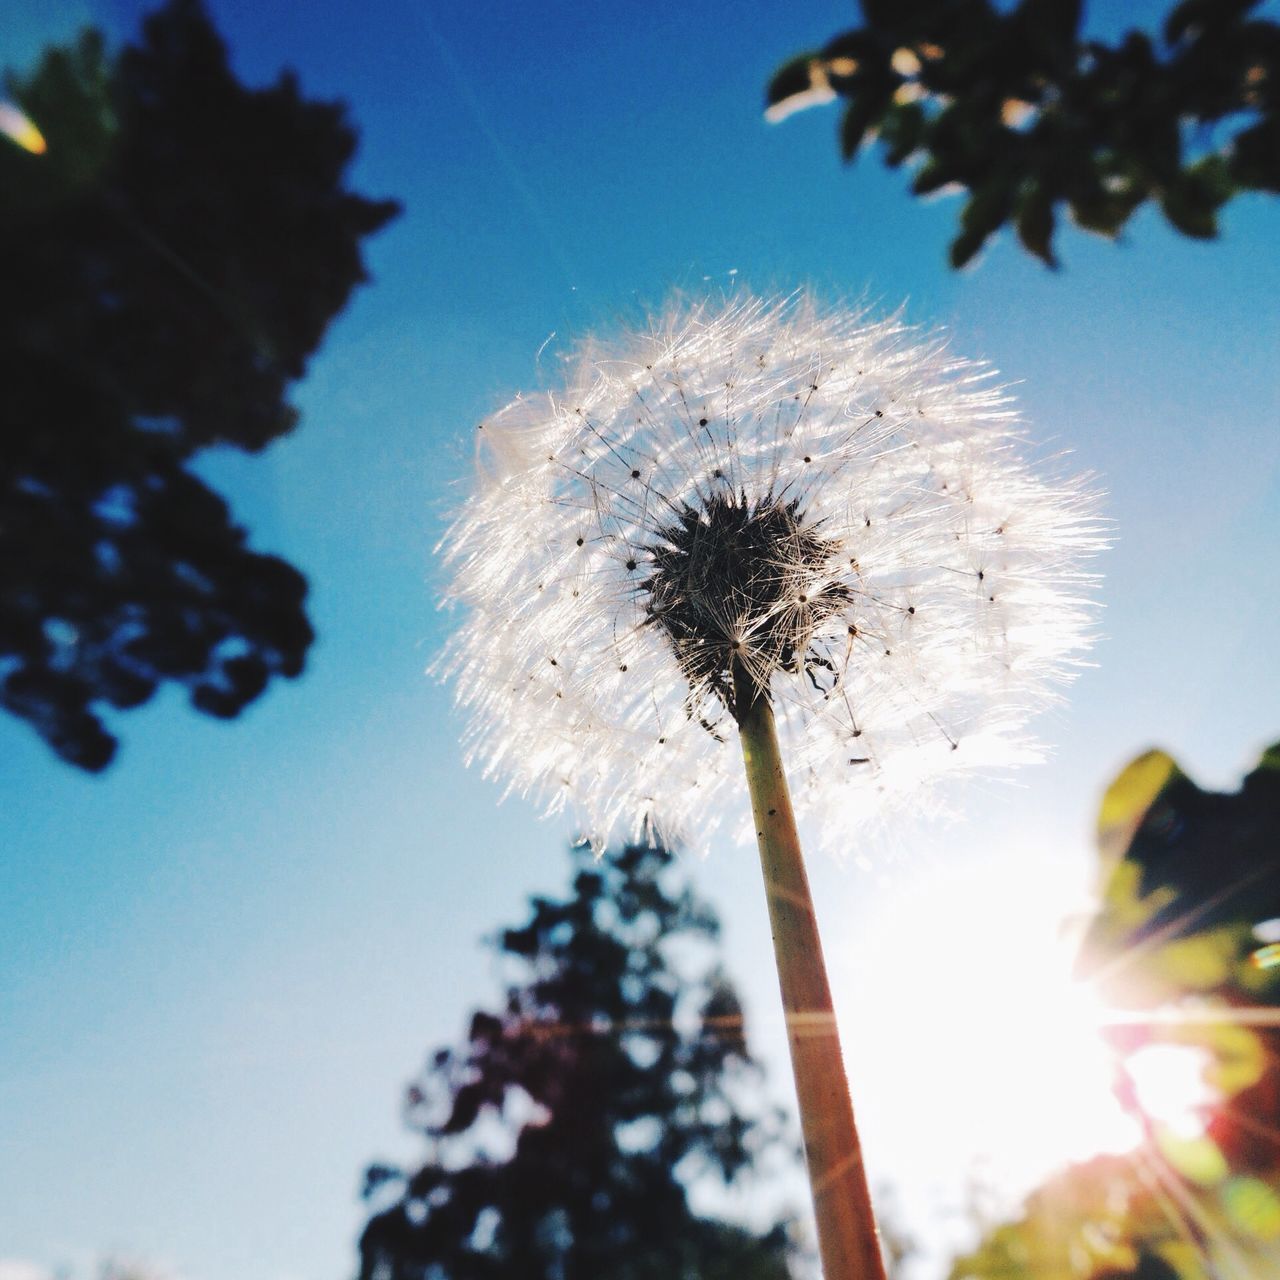 dandelion, flower, fragility, growth, low angle view, freshness, flower head, sky, nature, stem, focus on foreground, beauty in nature, close-up, dandelion seed, tree, single flower, clear sky, day, plant, outdoors